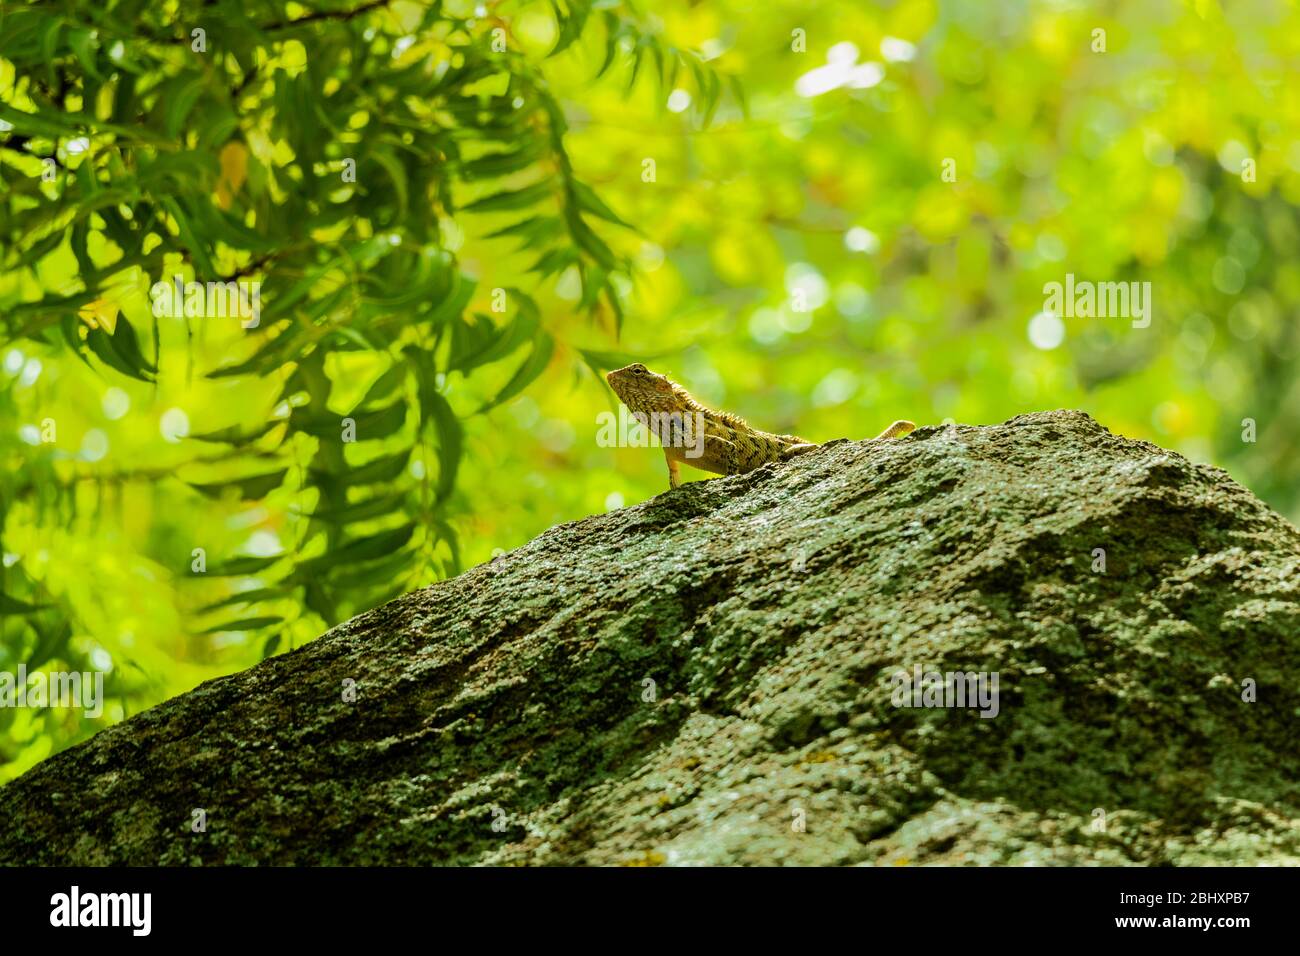 Chameleon on rock in a park with head reaching out Stock Photo